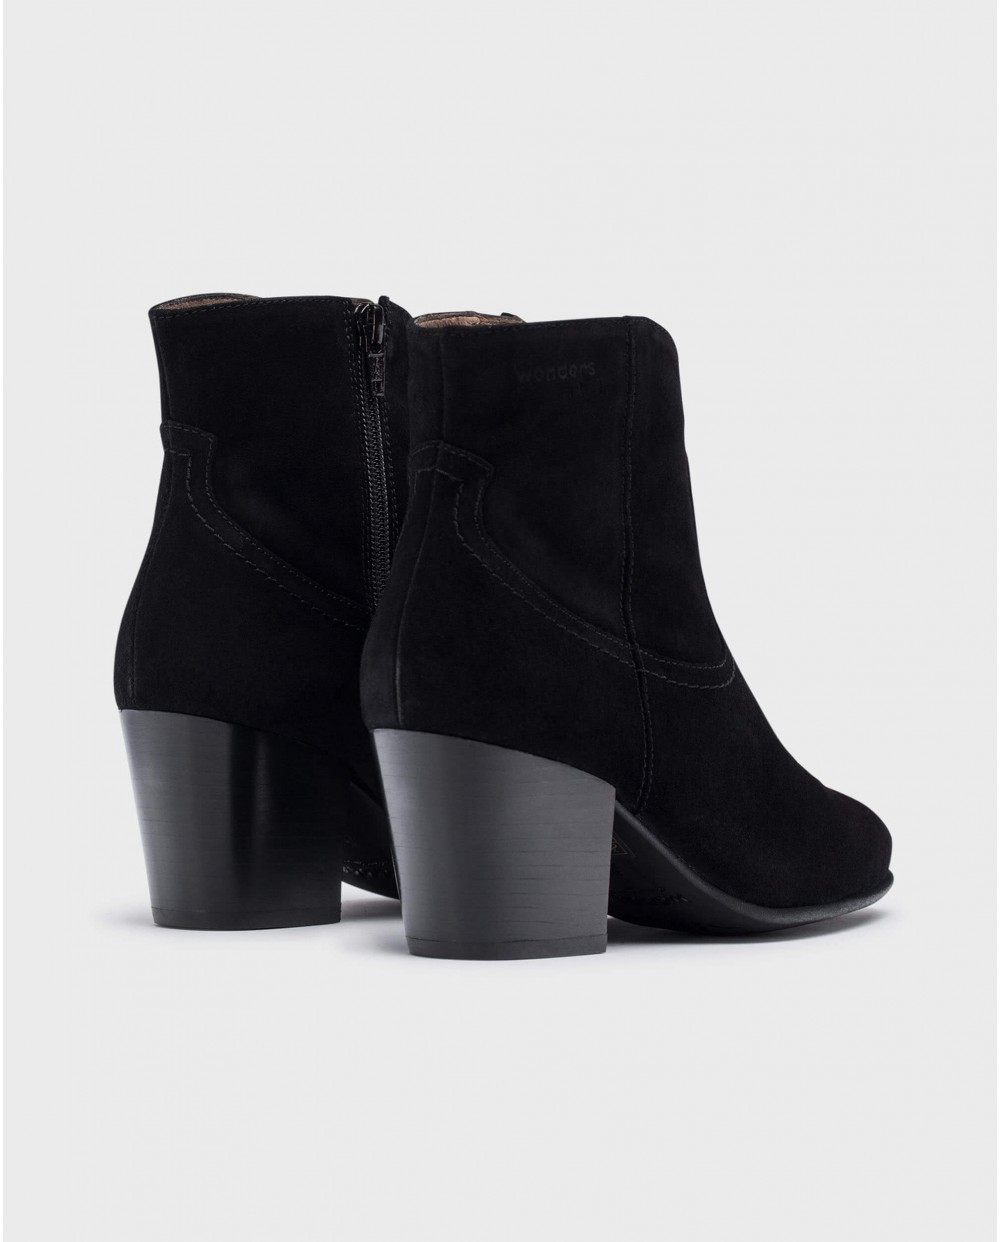 Wonders-Ankle Boots-Black CANE ankle boot